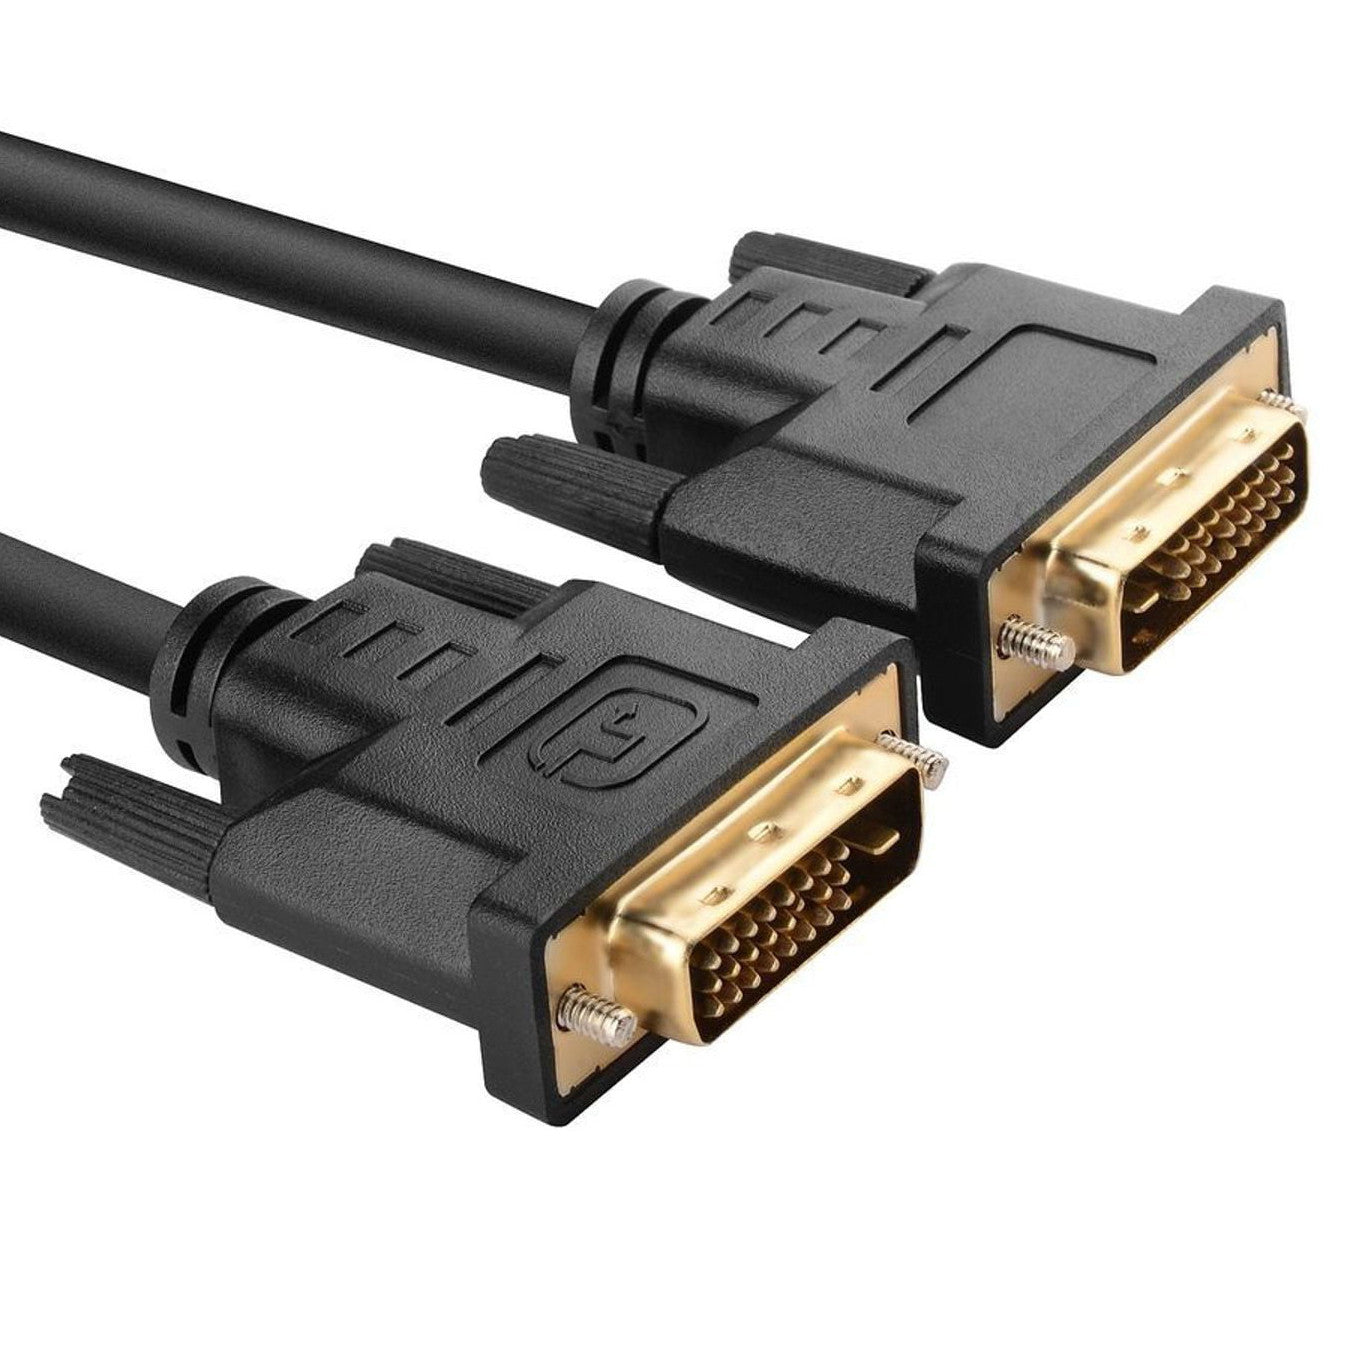 4K UHD DVI-D Dual Link Cable Gold Plated